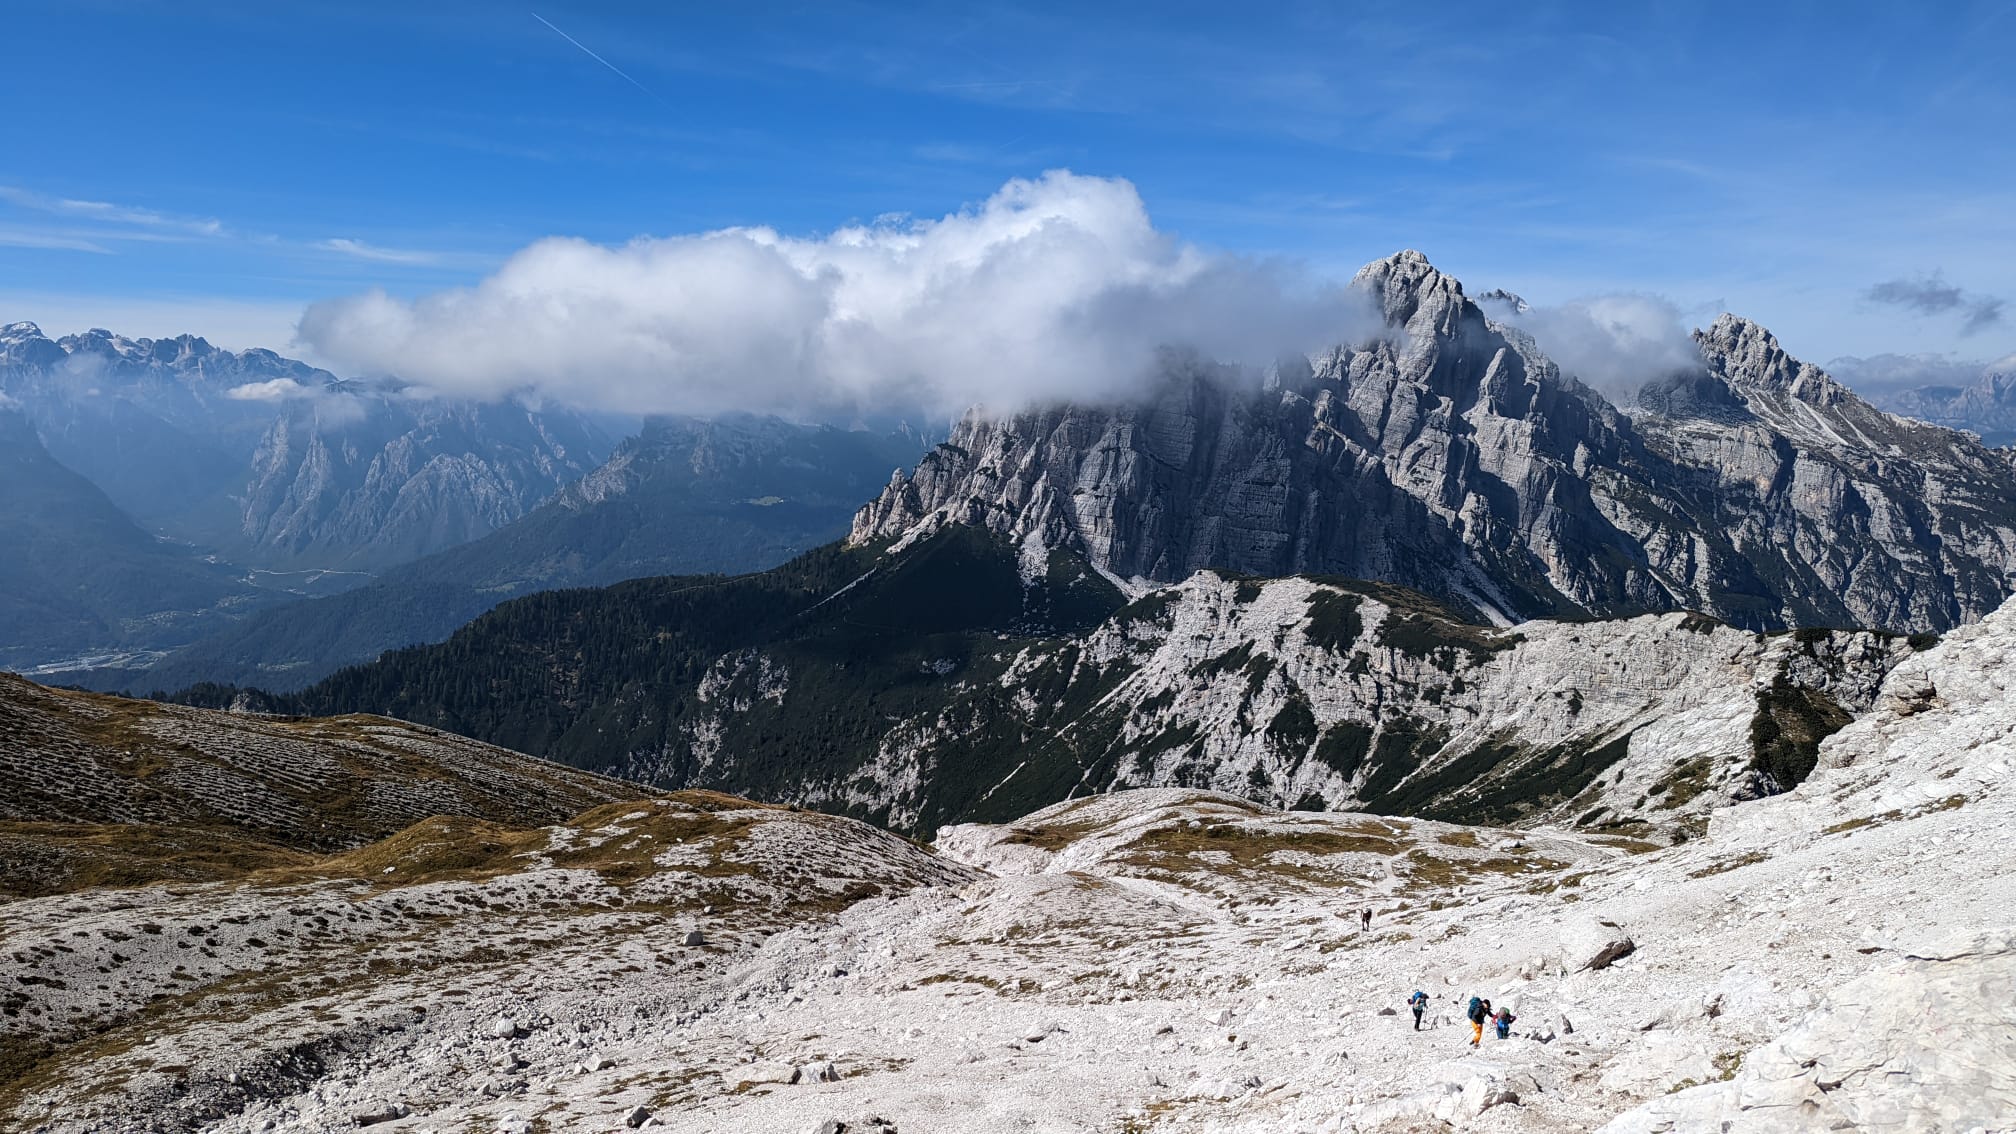 Hikers trekking in the Dolomites, Italy.